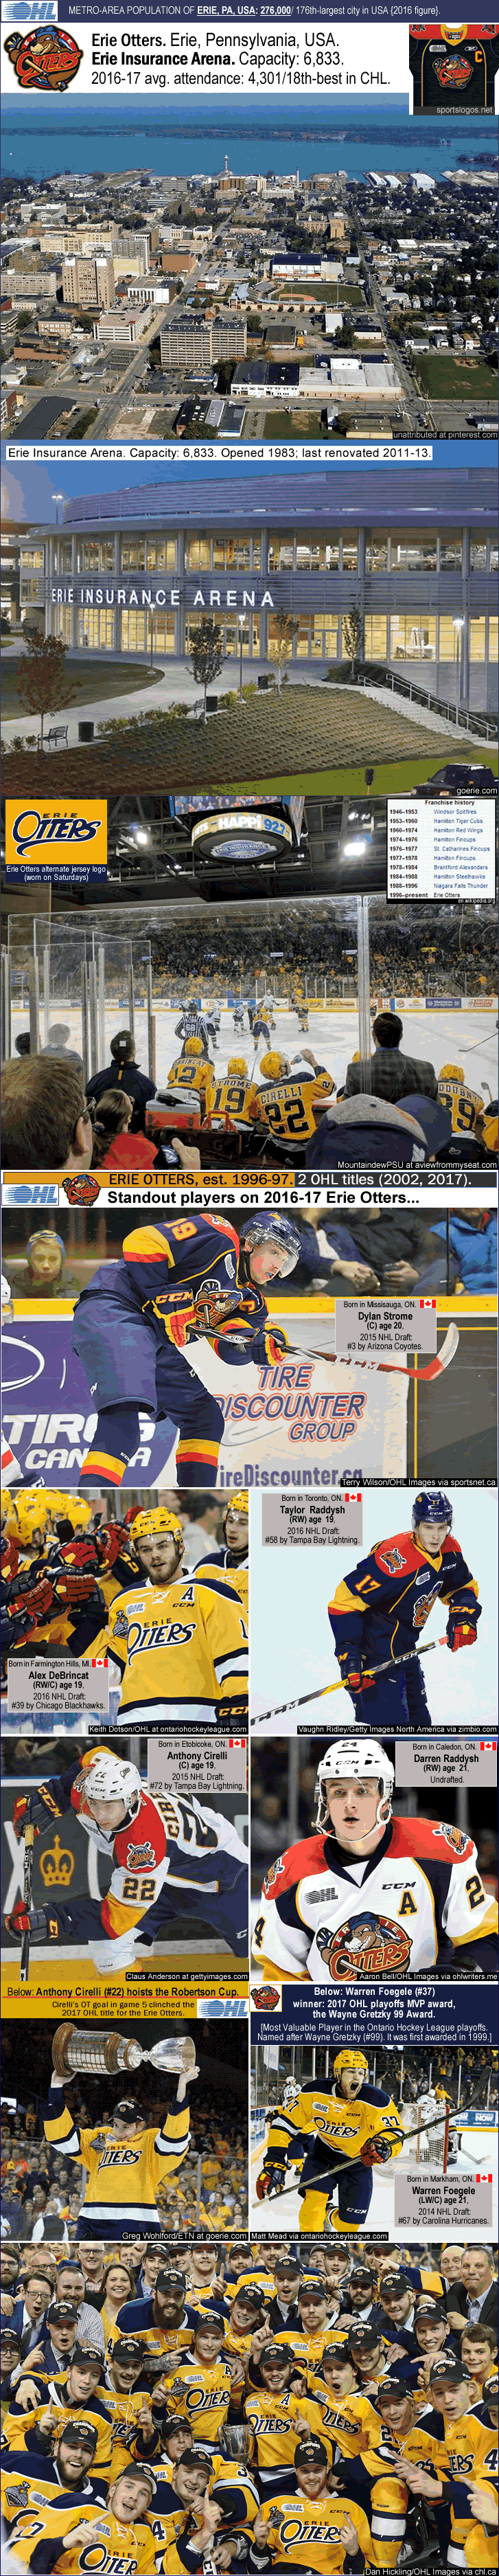 erie-otters_2017-ohl-champions__2017-memorial-cup_i_.gif